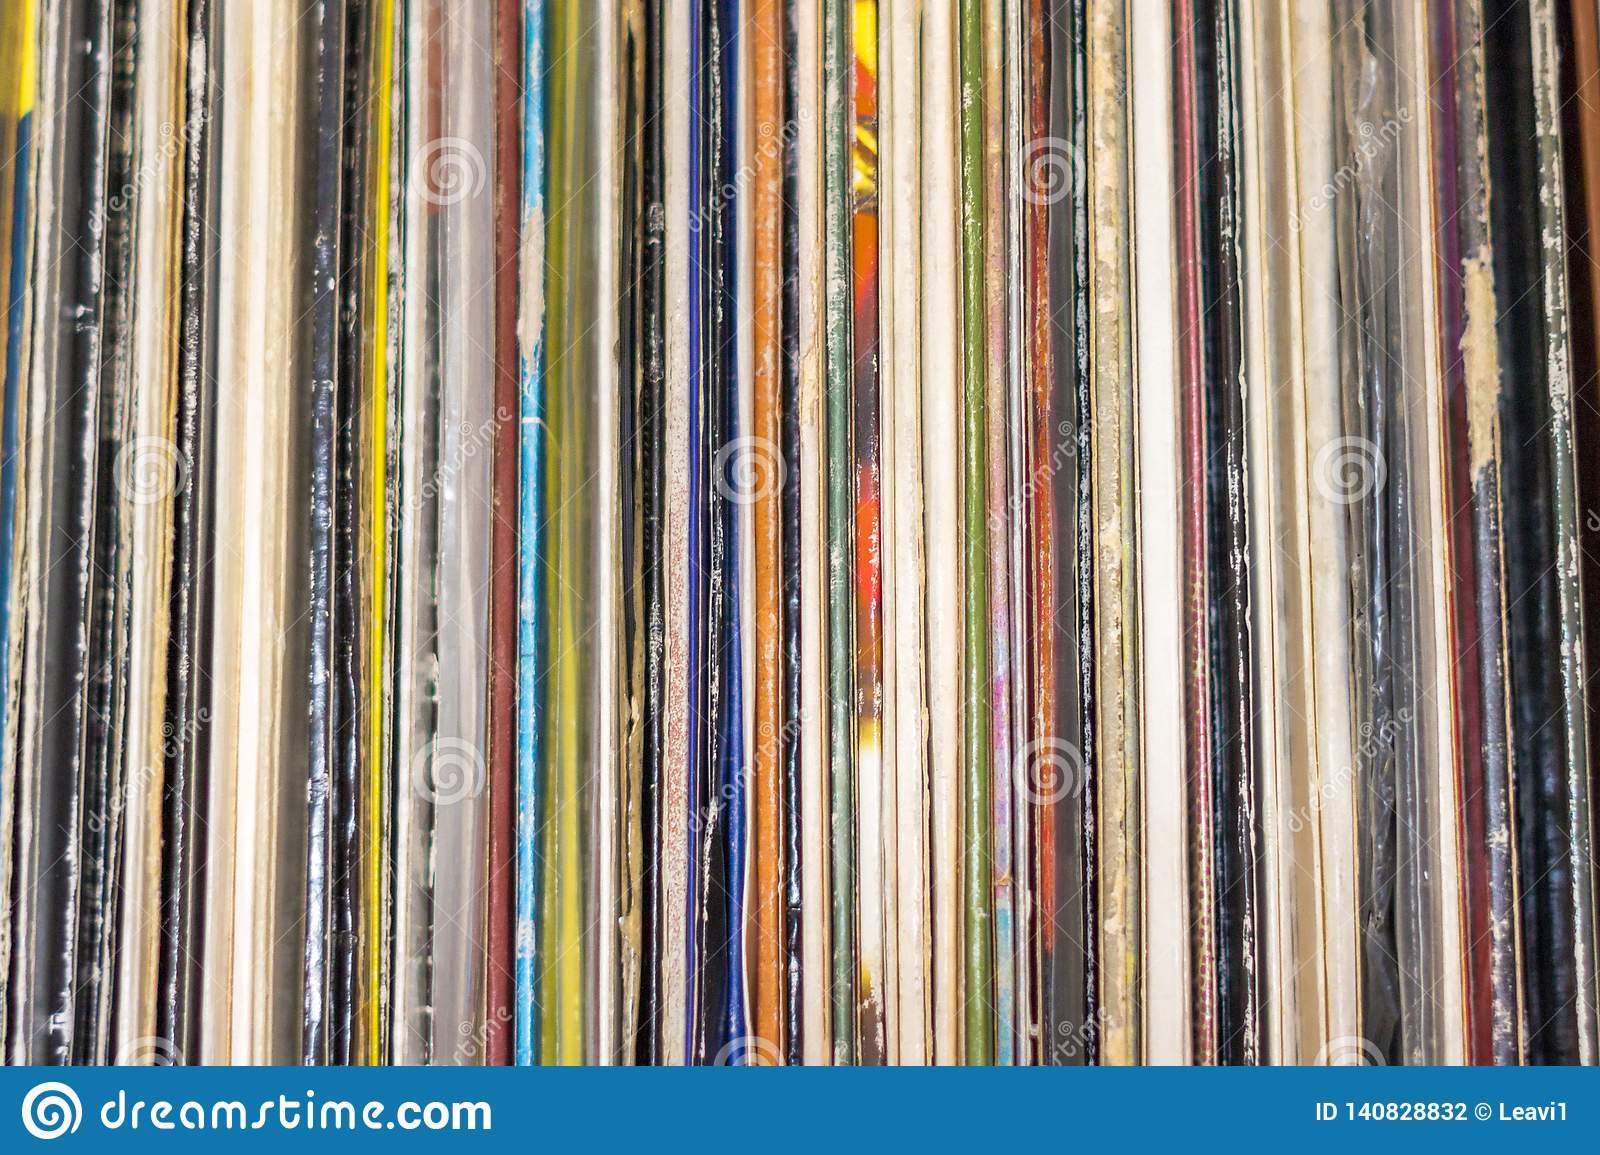 Detail Images Of Record Albums Nomer 46